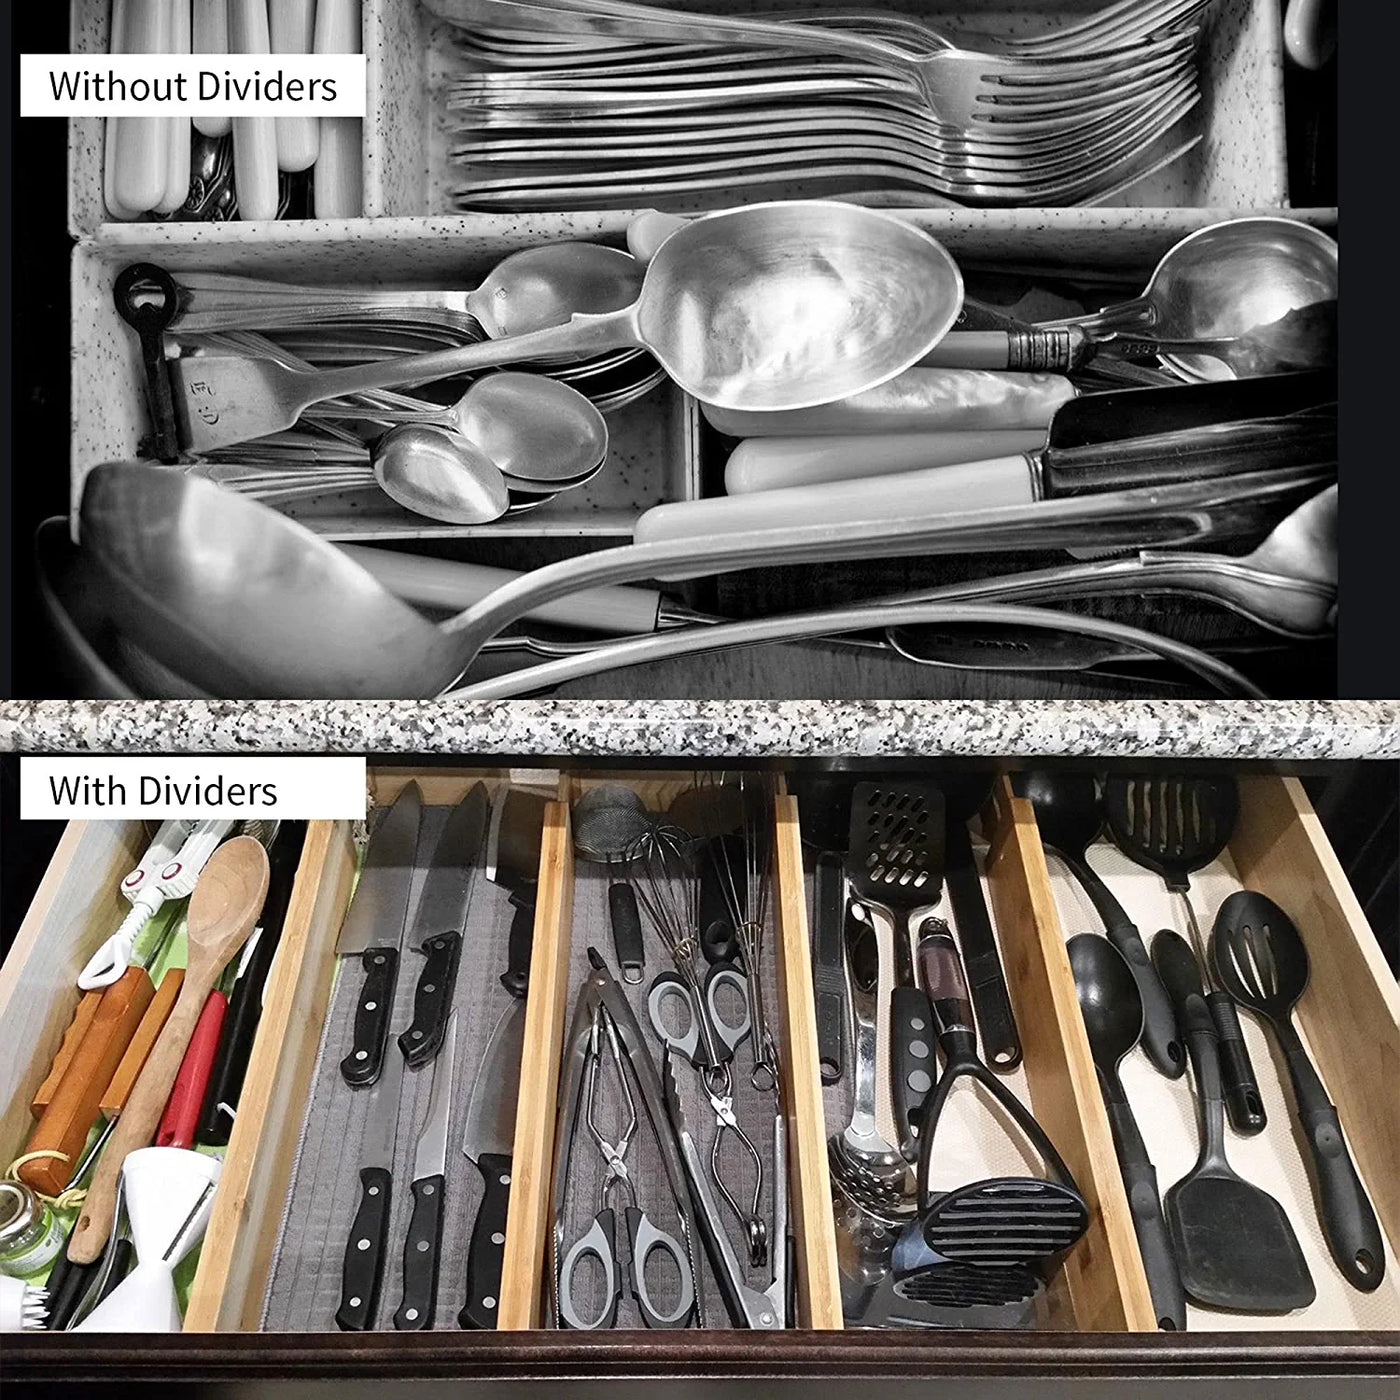 Bamboo drawer organizers in a kitchen drawer